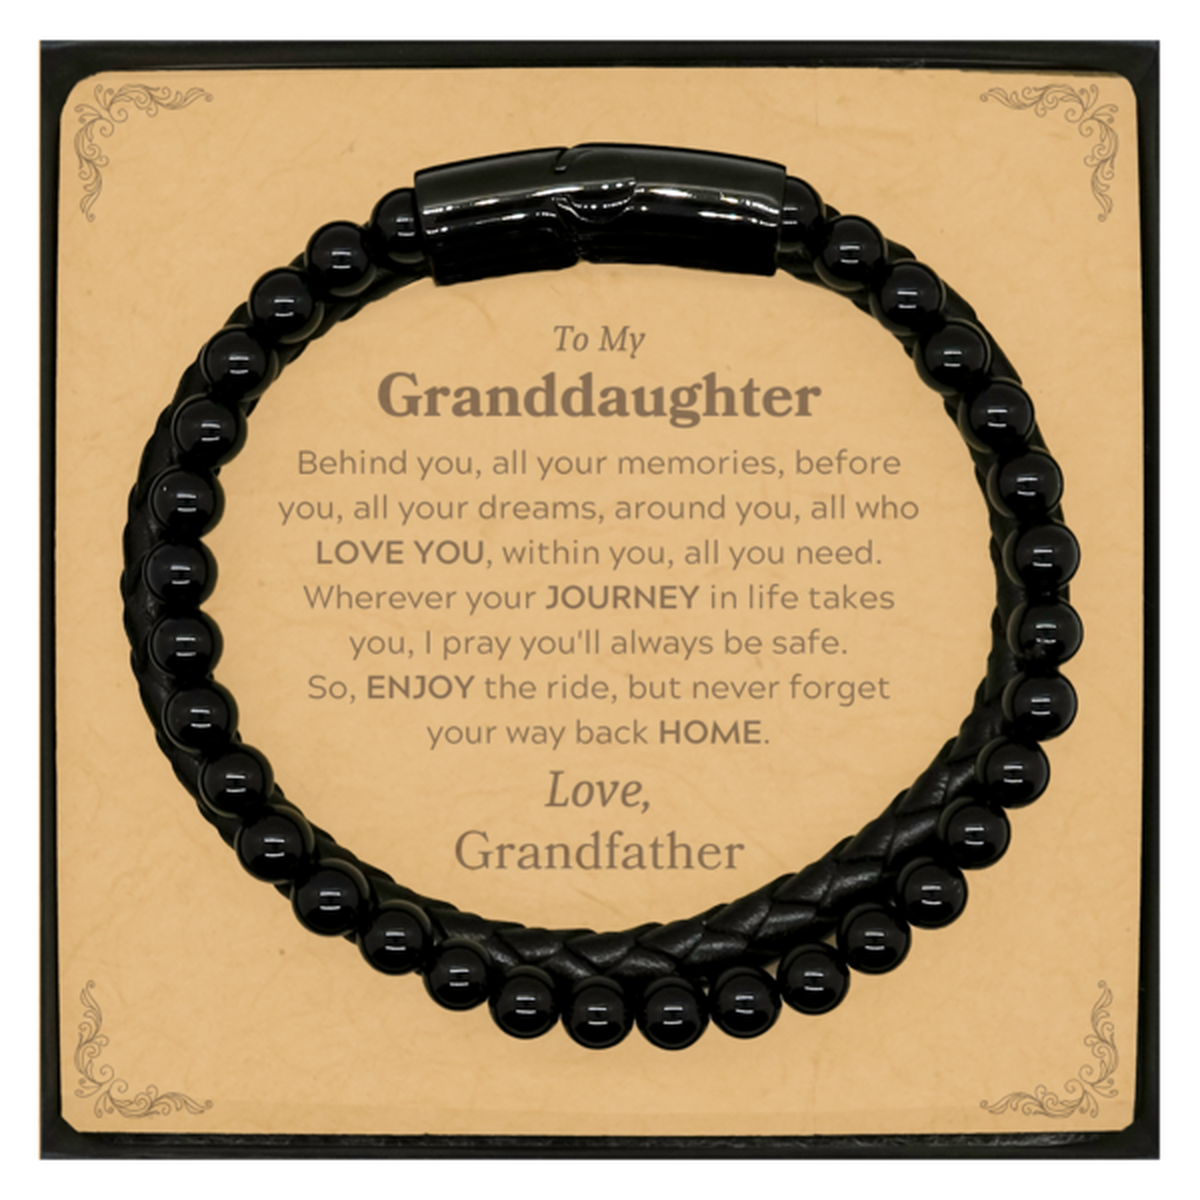 To My Granddaughter Graduation Gifts from Grandfather, Granddaughter Stone Leather Bracelets Christmas Birthday Gifts for Granddaughter Behind you, all your memories, before you, all your dreams. Love, Grandfather